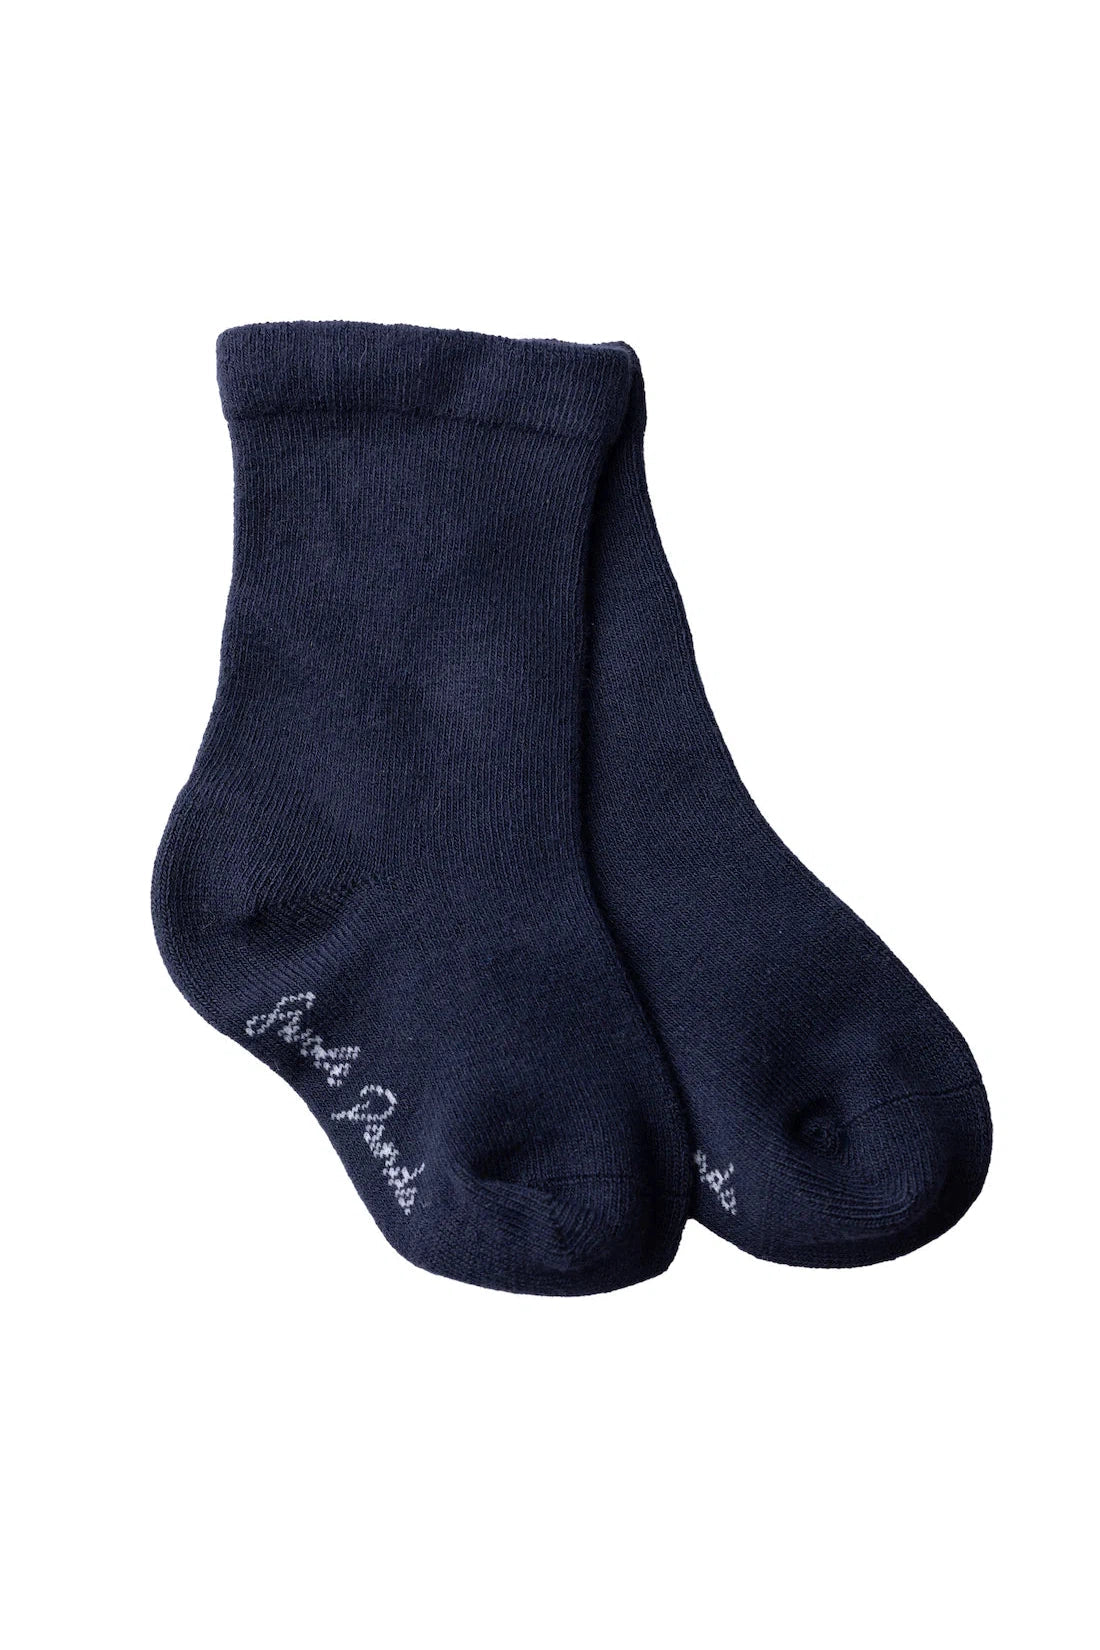 Swole Panda Childrens Bamboo Navy Socks-Kids-Ohh! By Gum - Shop Sustainable